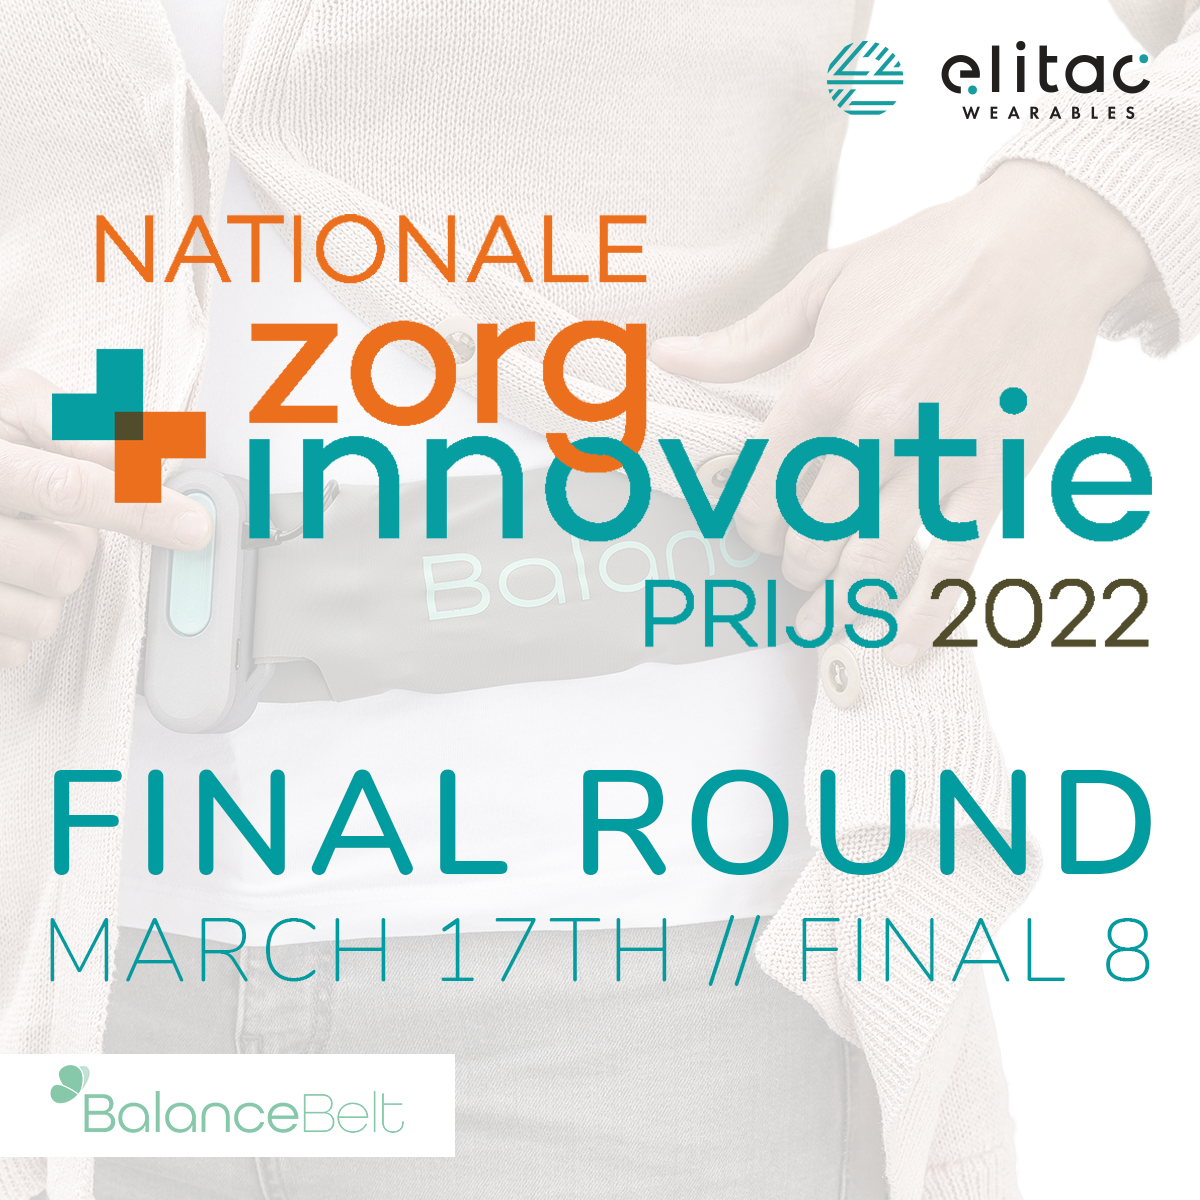 We have made it to the finals of the Nationale Zorg Innovatie Prijs 2022!